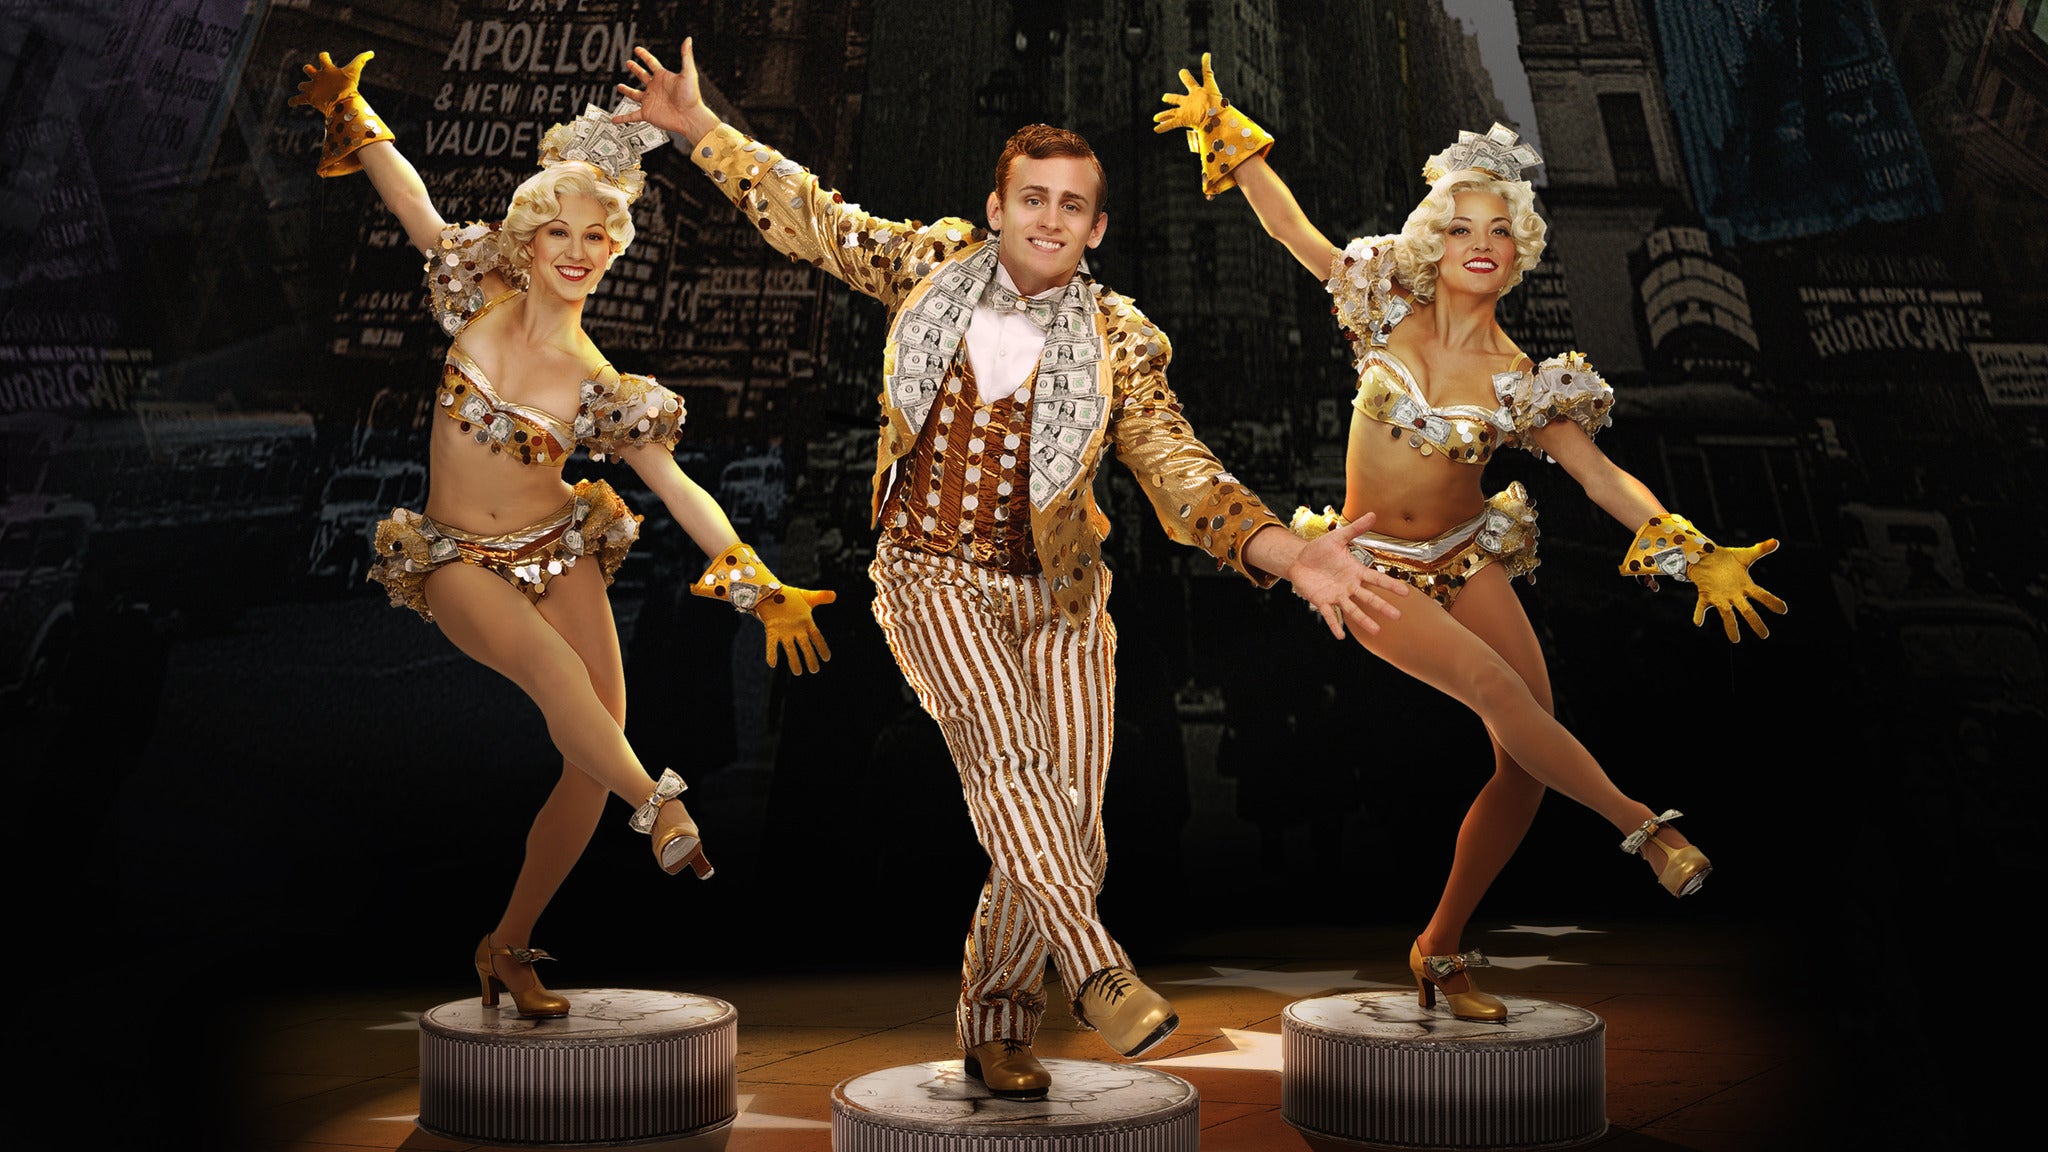 42nd STREET in San Jose promo photo for Exclusive presale offer code